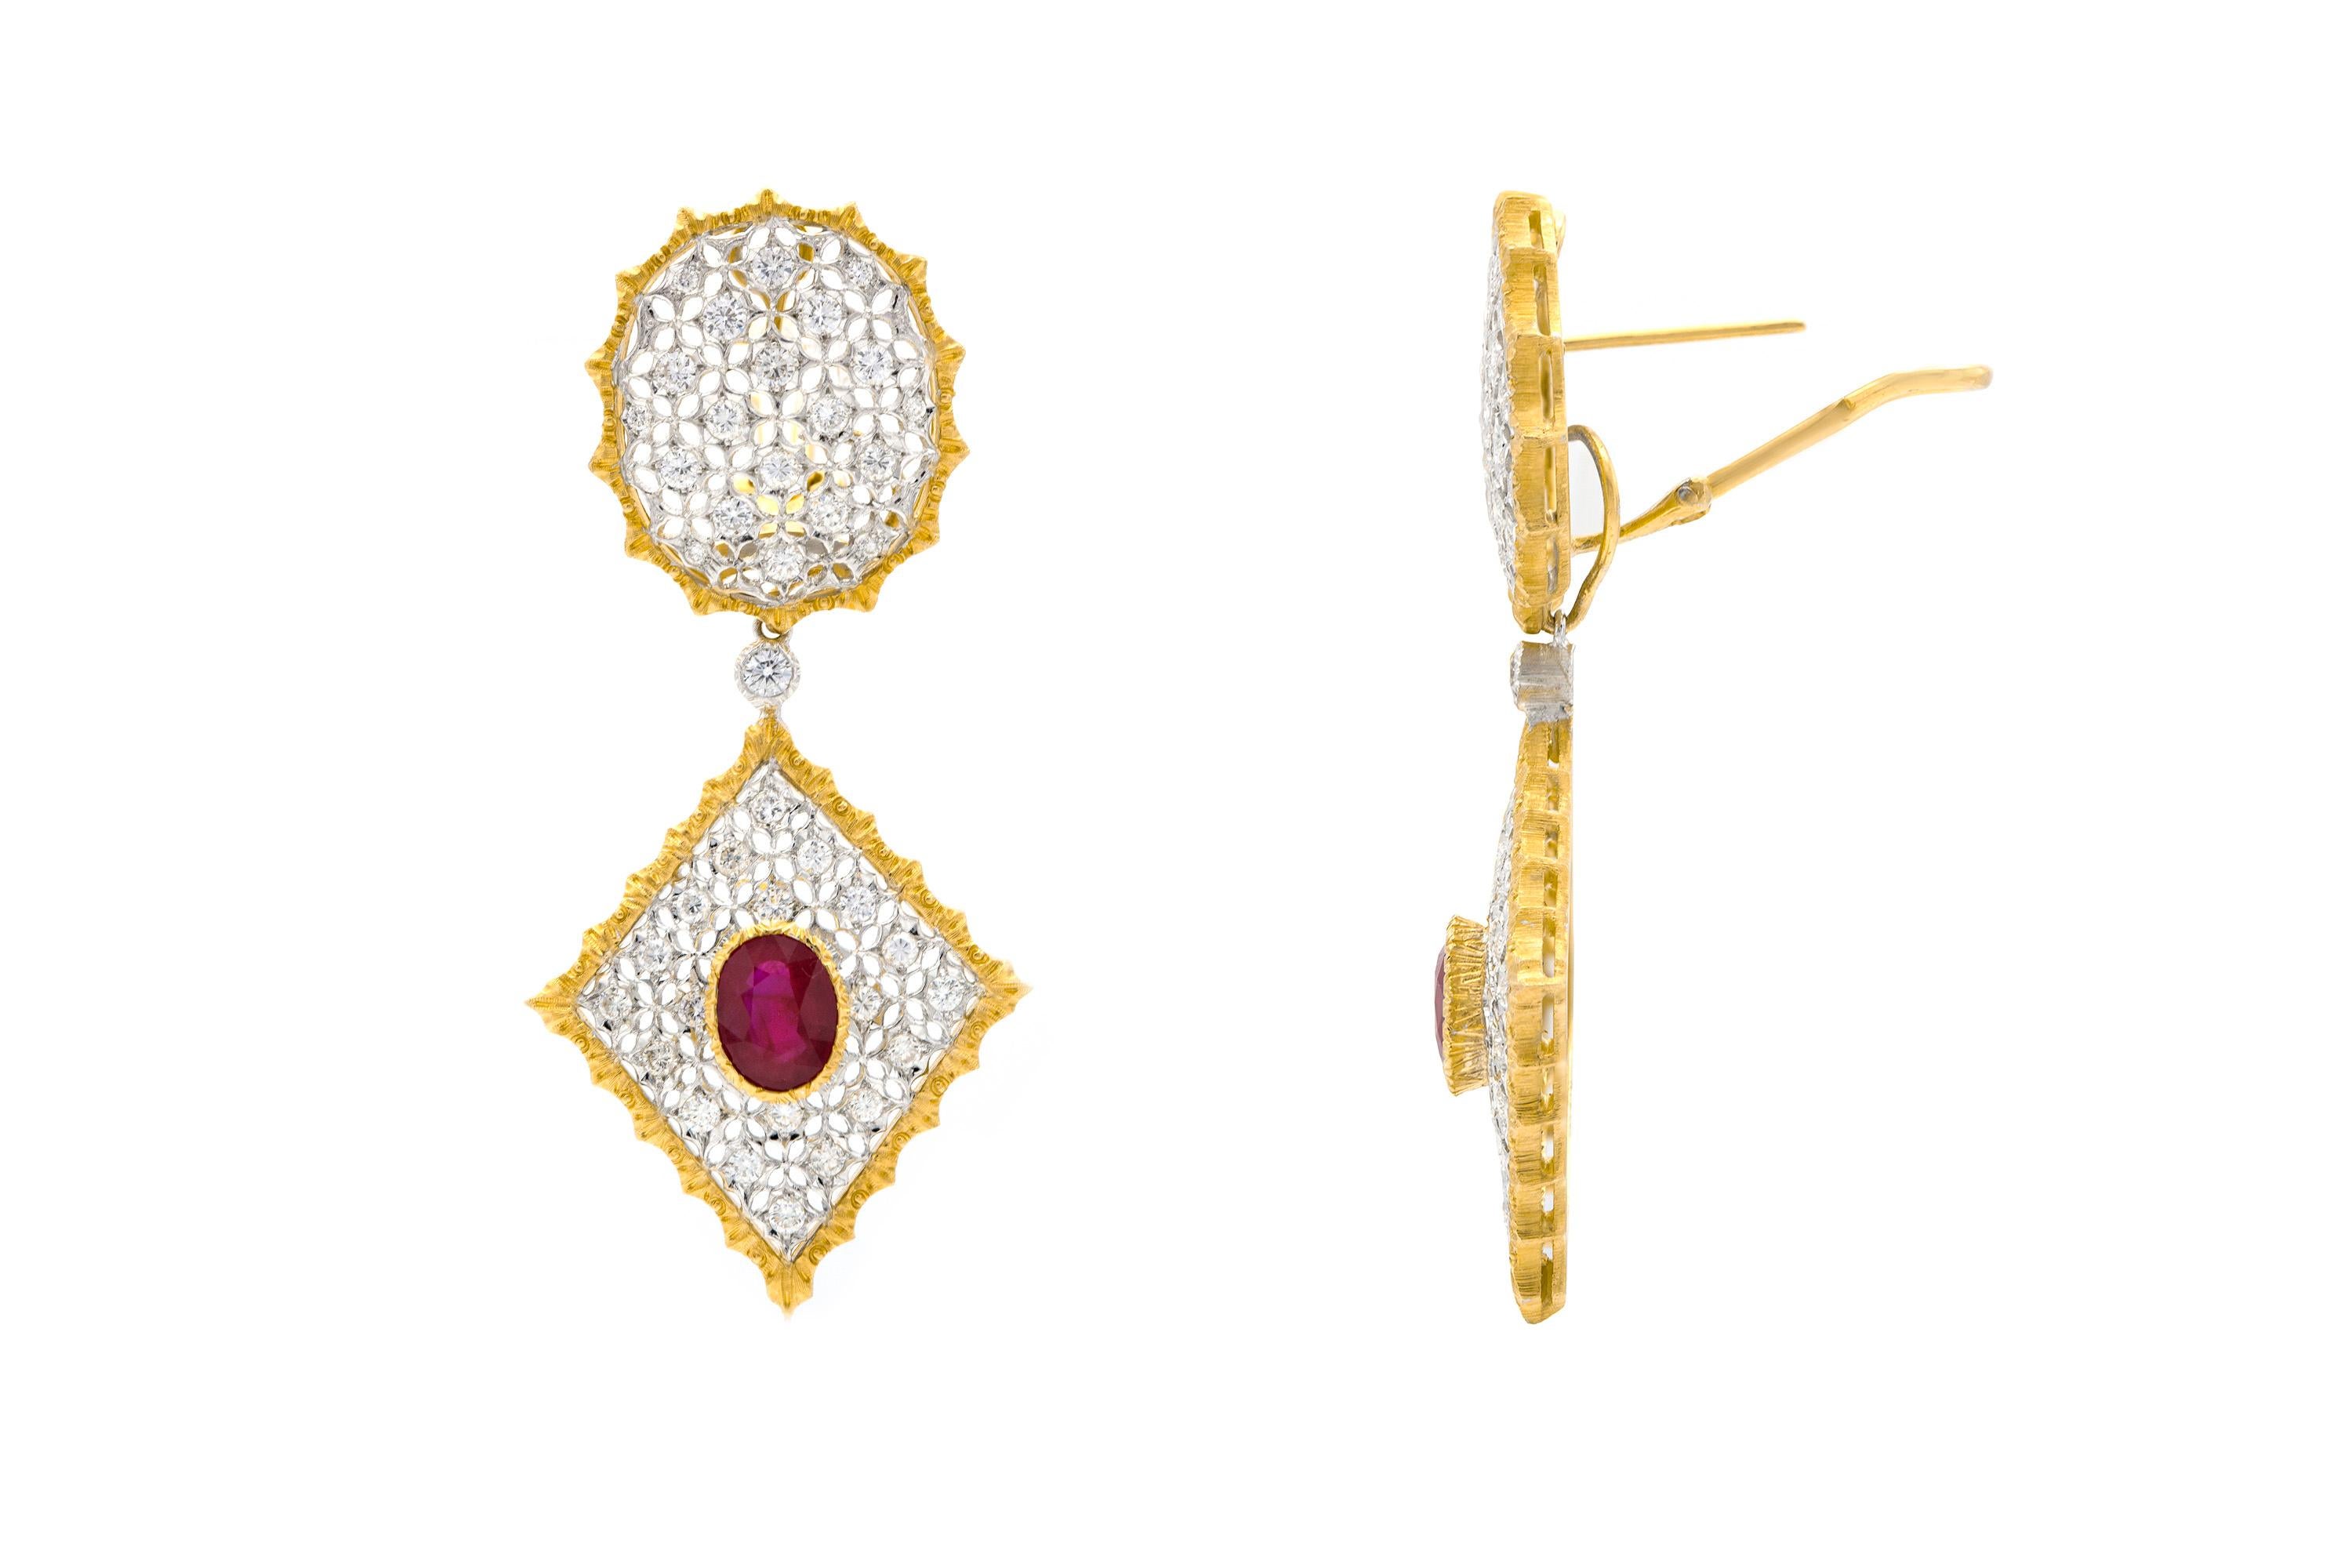 Finely crafted in 18k yellow gold and platinum with rubies weighing a total of approximately 4.00 carats.
The earrings feature diamonds weighing approximately a total of 4.00 carats.
The dangles are detachable.
Signed M. Buccellati
Comes with